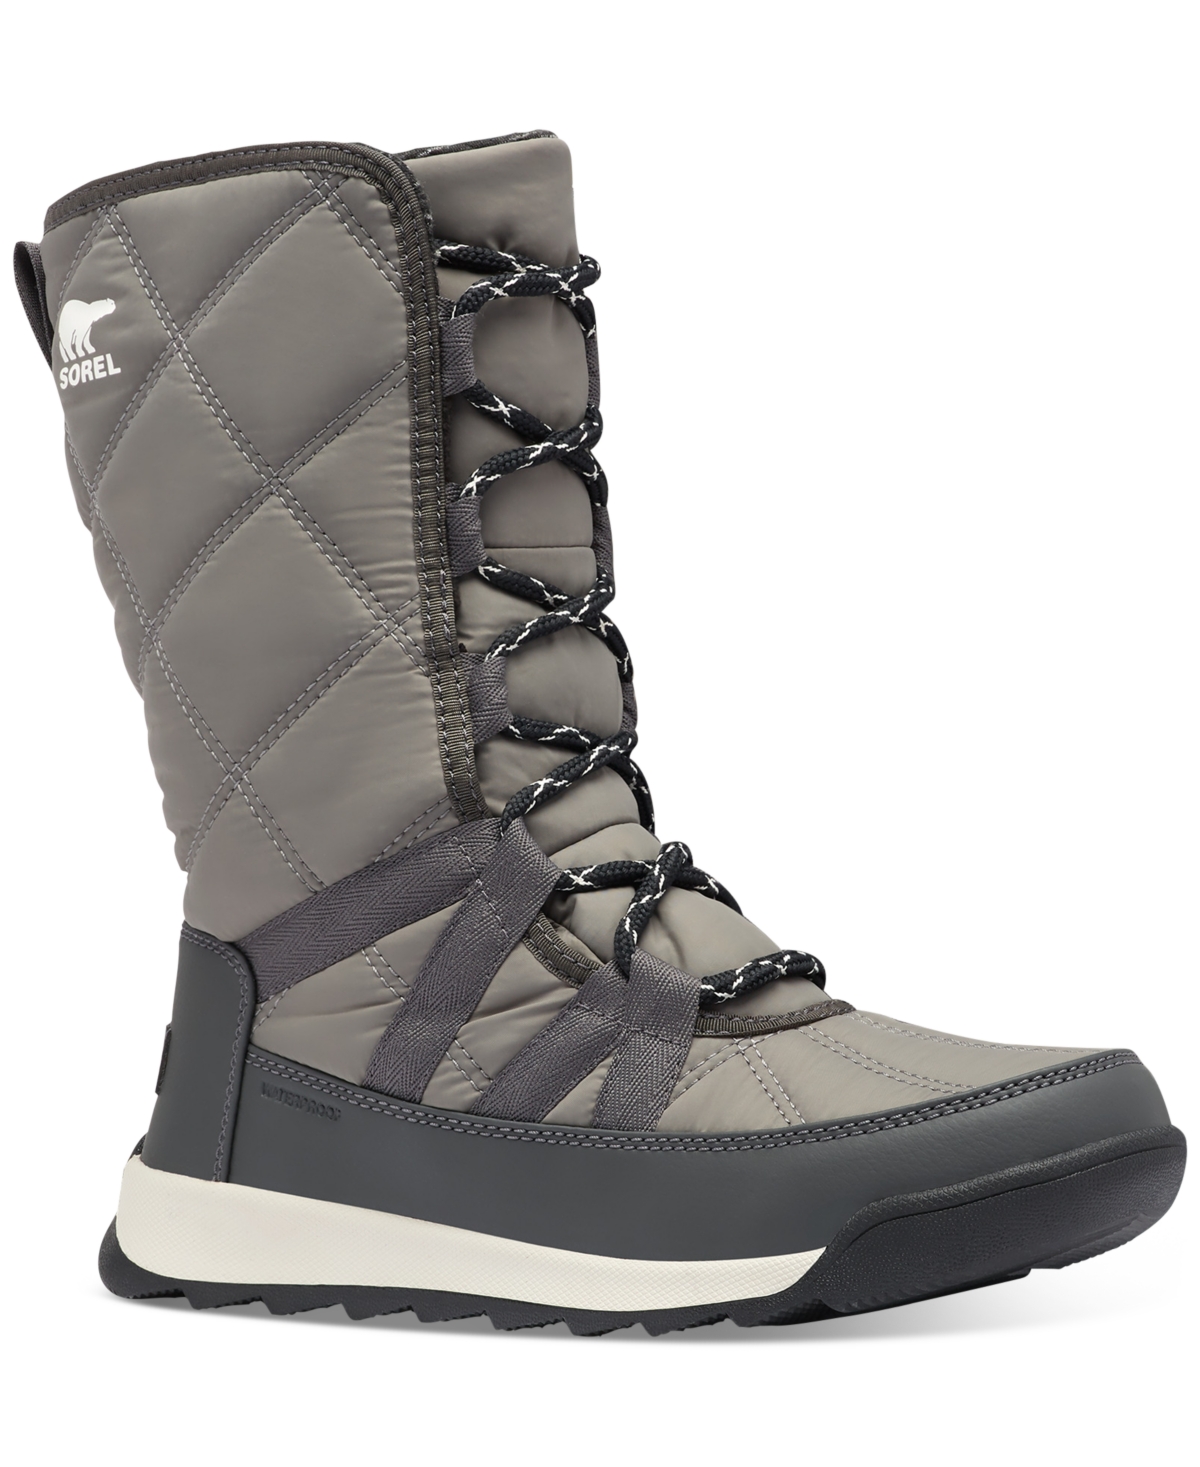 SOREL Whitney II Winterproof Boot in Quarry at Nordstrom, Size 9